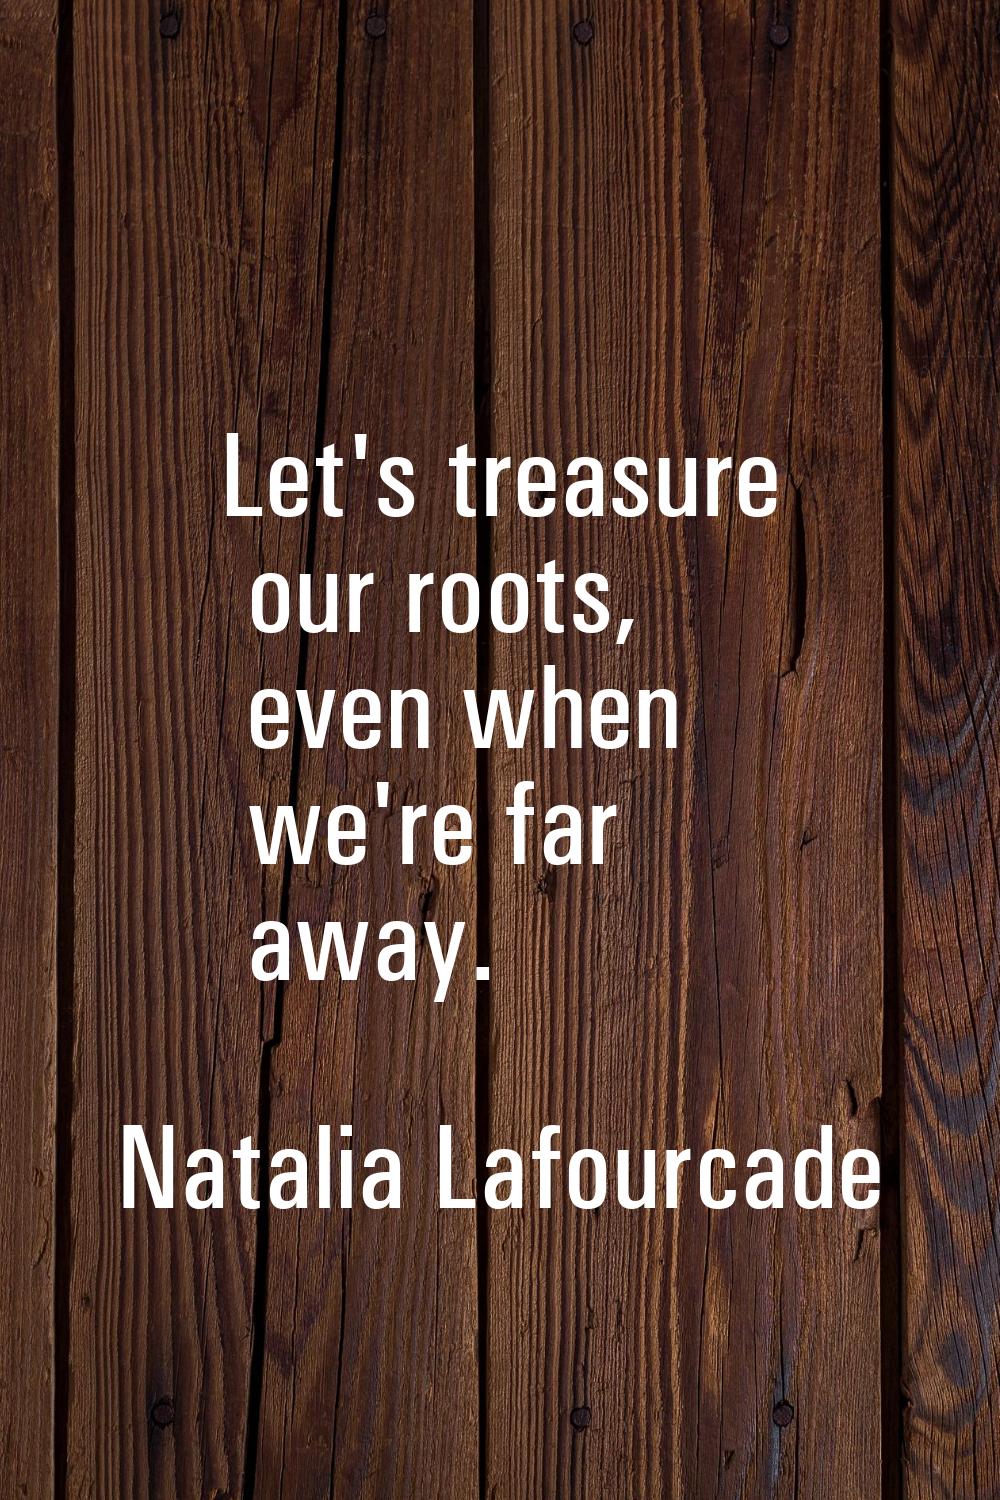 Let's treasure our roots, even when we're far away.